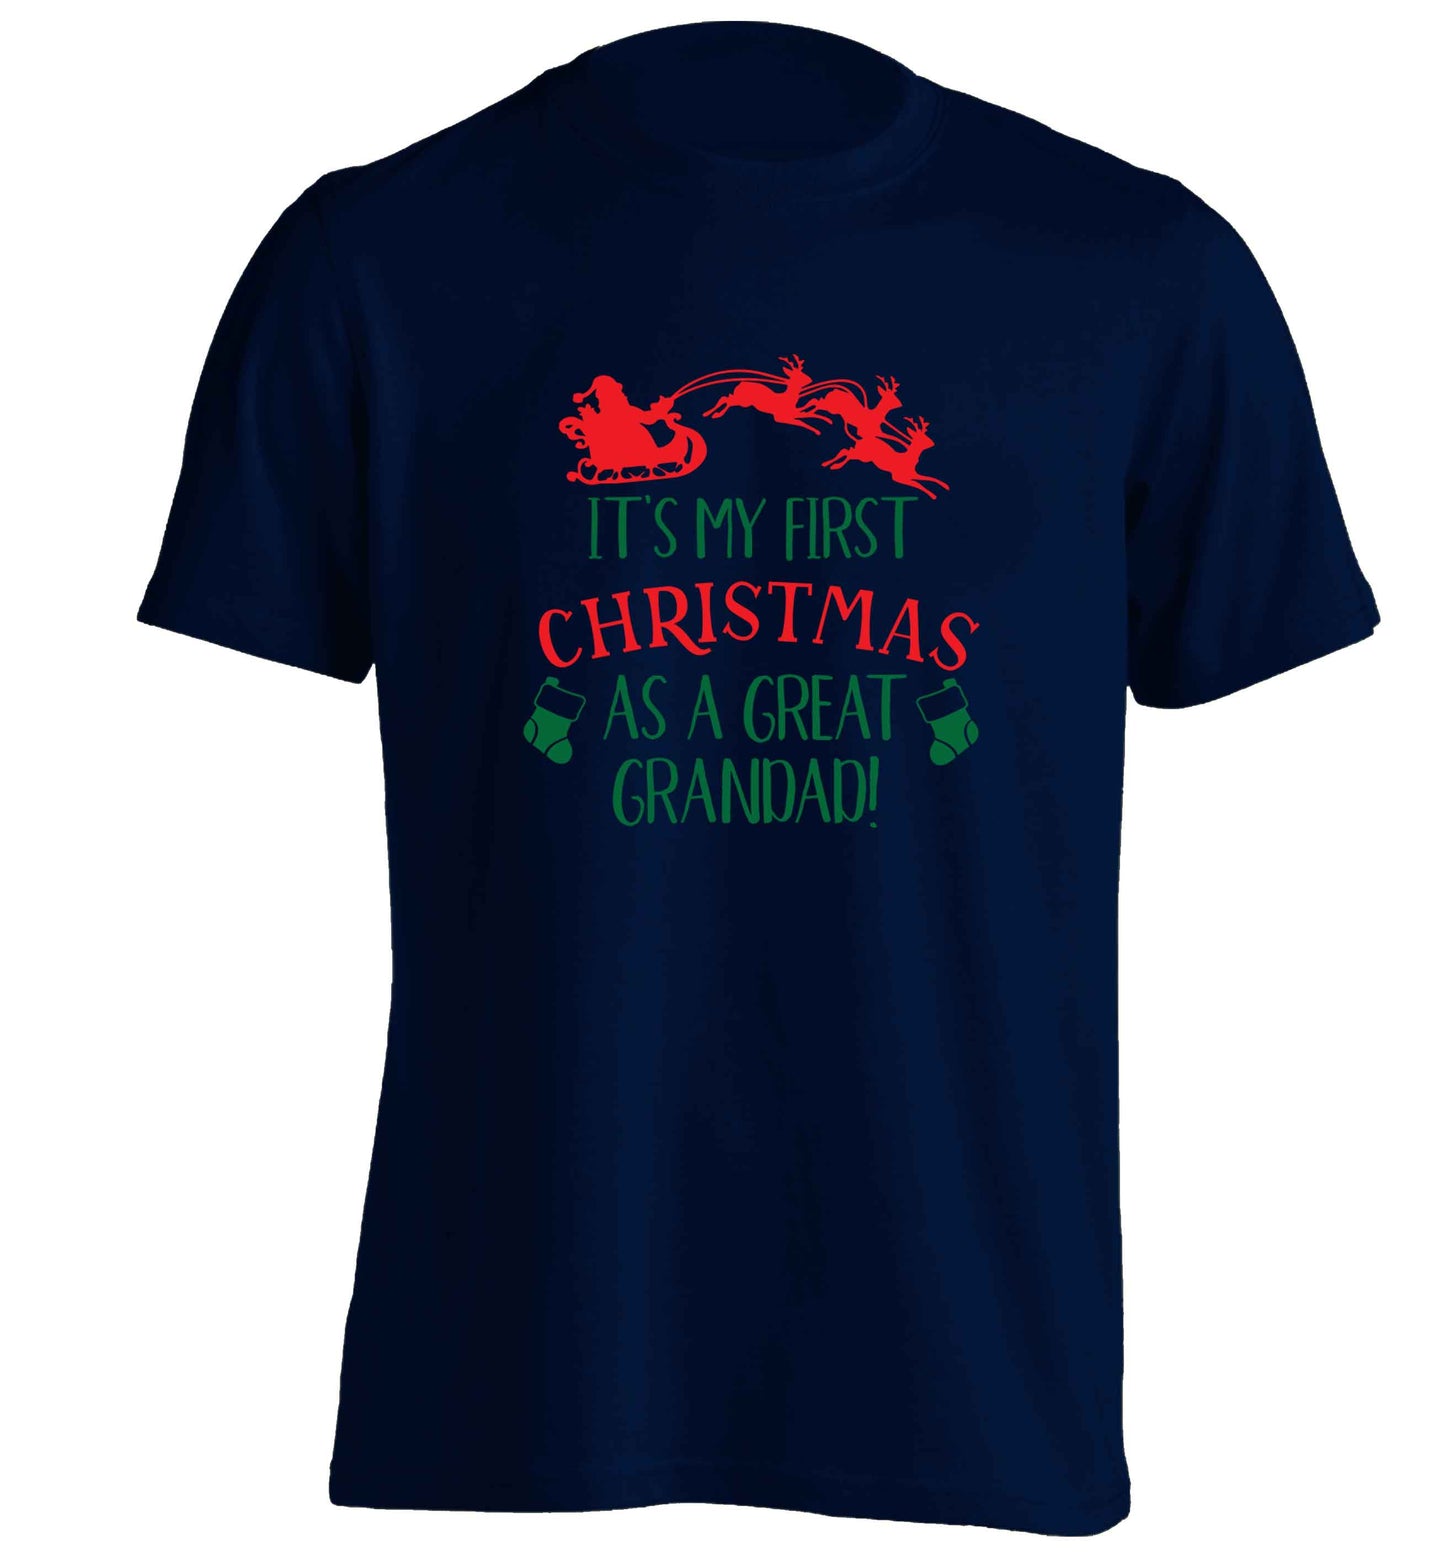 It's my first Christmas as a great grandad! adults unisex navy Tshirt 2XL